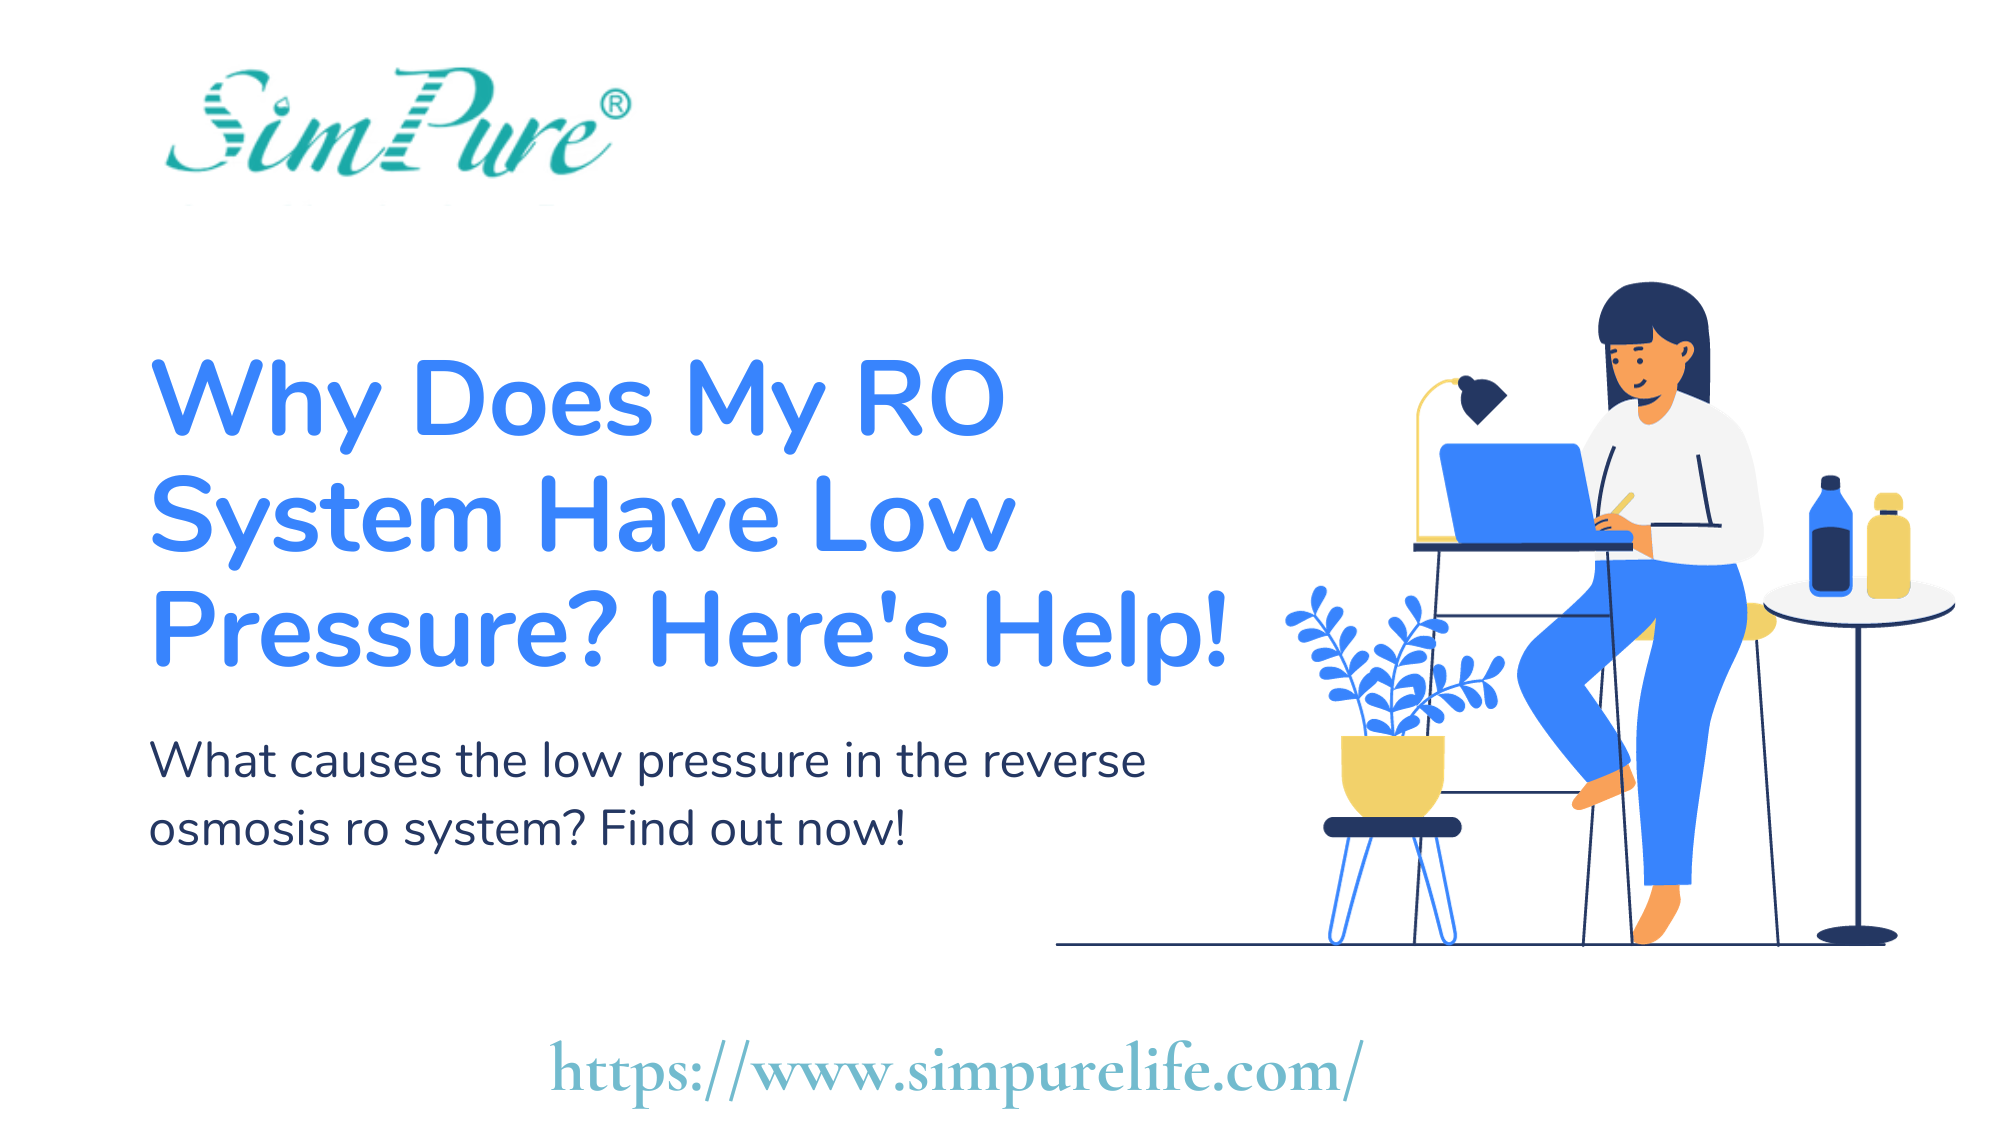 Why Does My RO System Have Low Pressure? Here's Help!